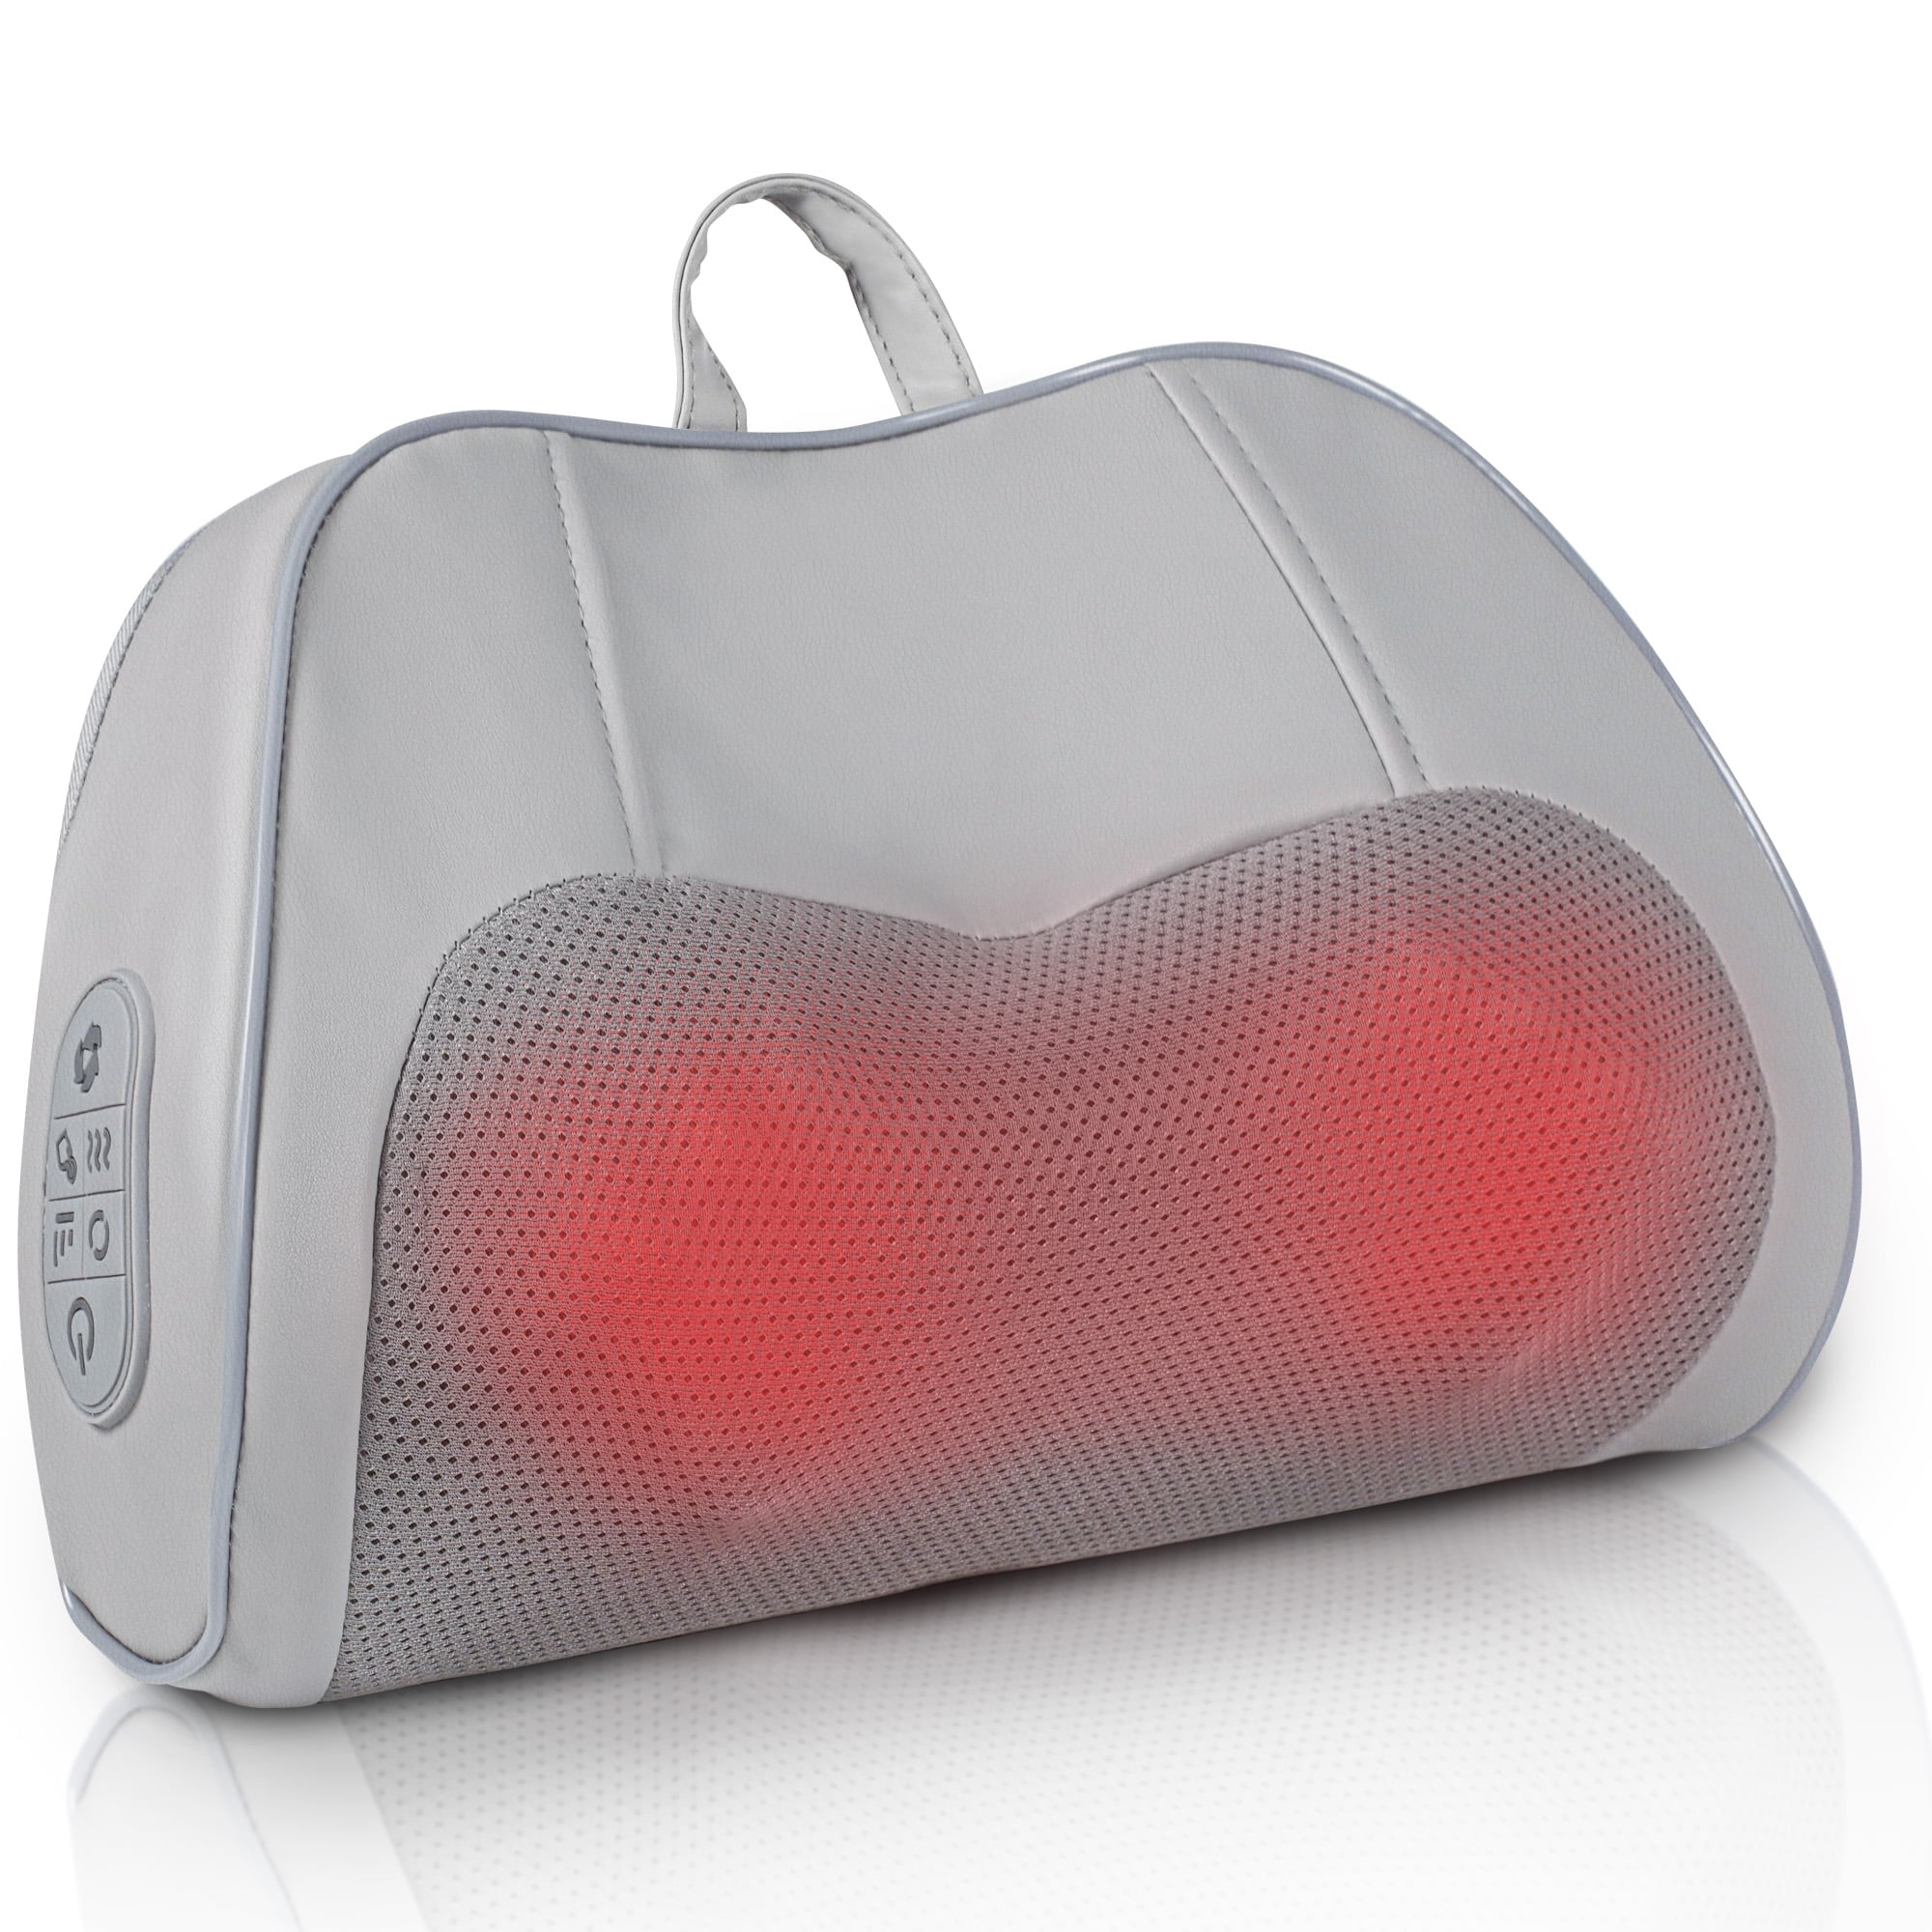 Shiatsu Neck and Back Massager with Soothing Heat - Deep Tissue 3D Kneading  Massage Pillow, 1 pc - Kroger